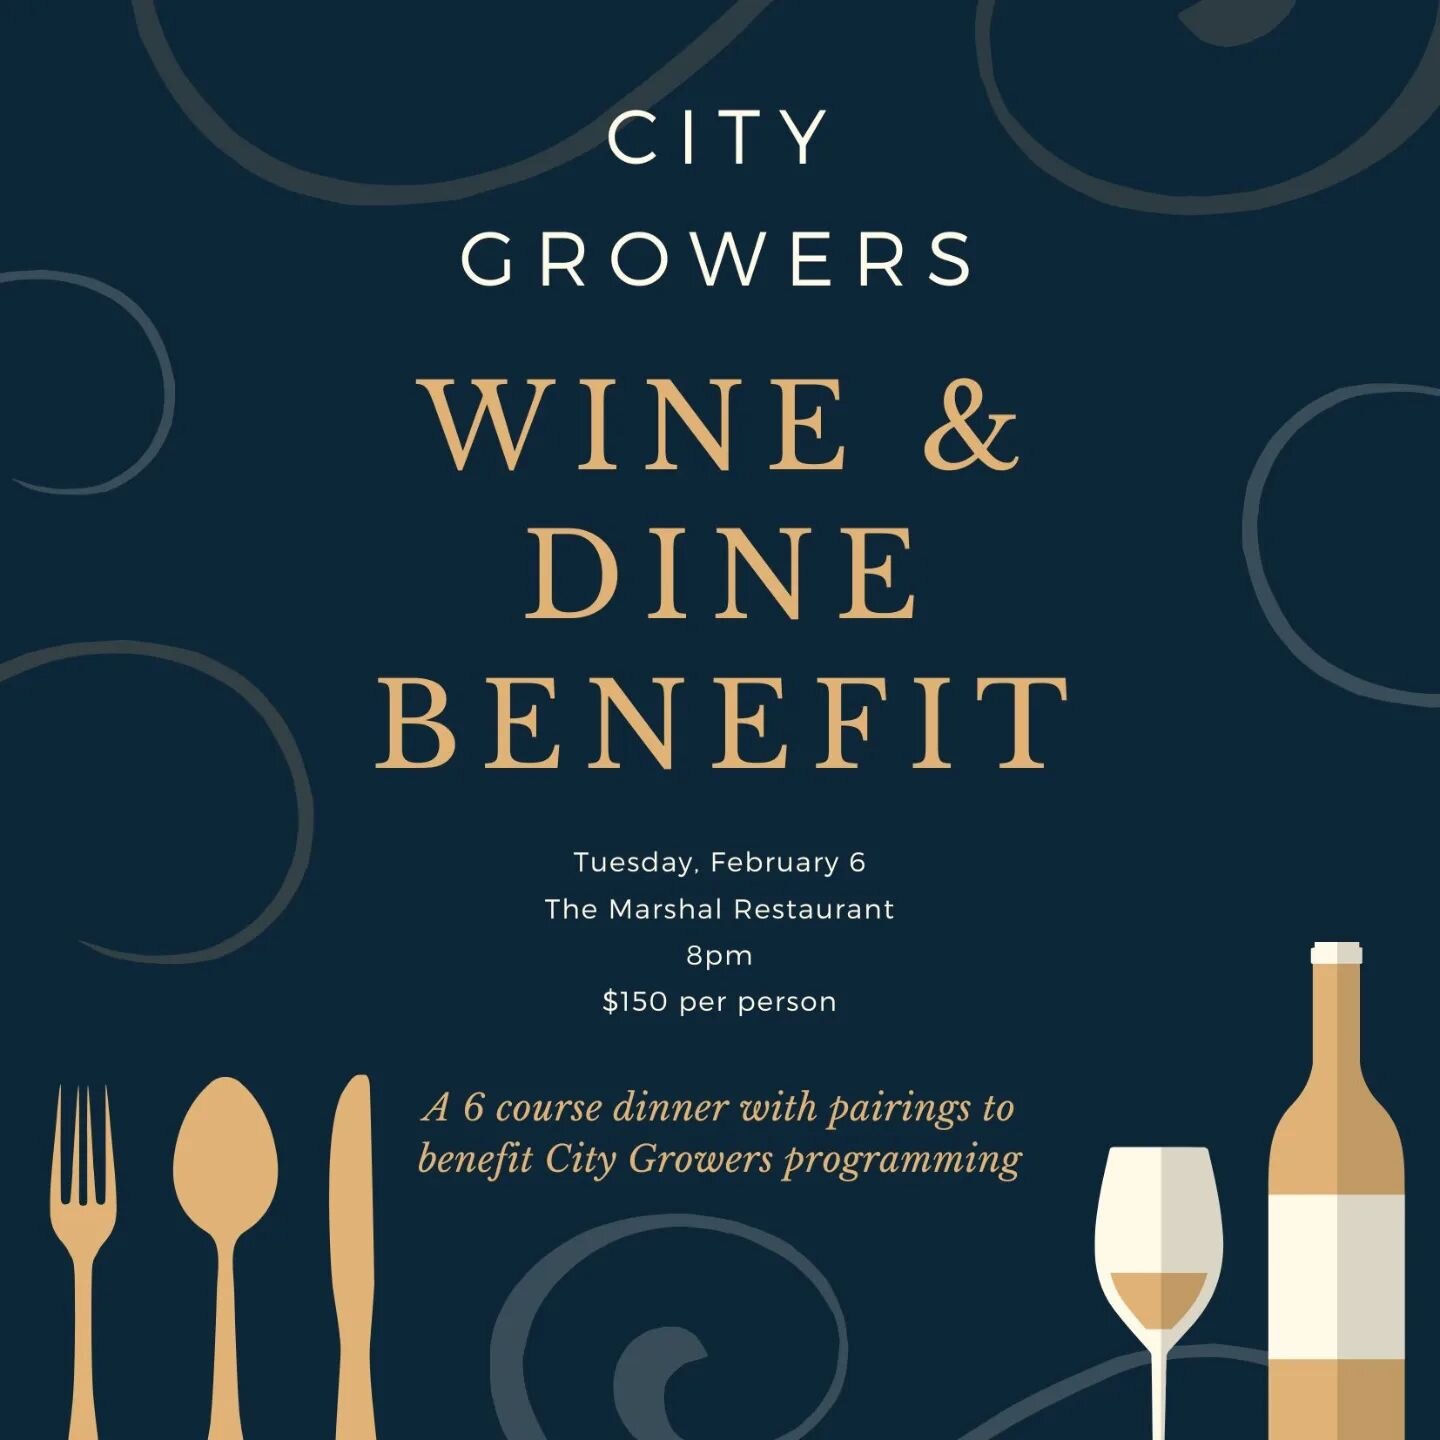 On Tuesday, February 6th, please join City Growers for a six course wood-fired, farm to table dinner with local wines expertly paired by Chef Charlie Marshall. Celebrate New York wines and local harvests with all proceeds going to support City Grower